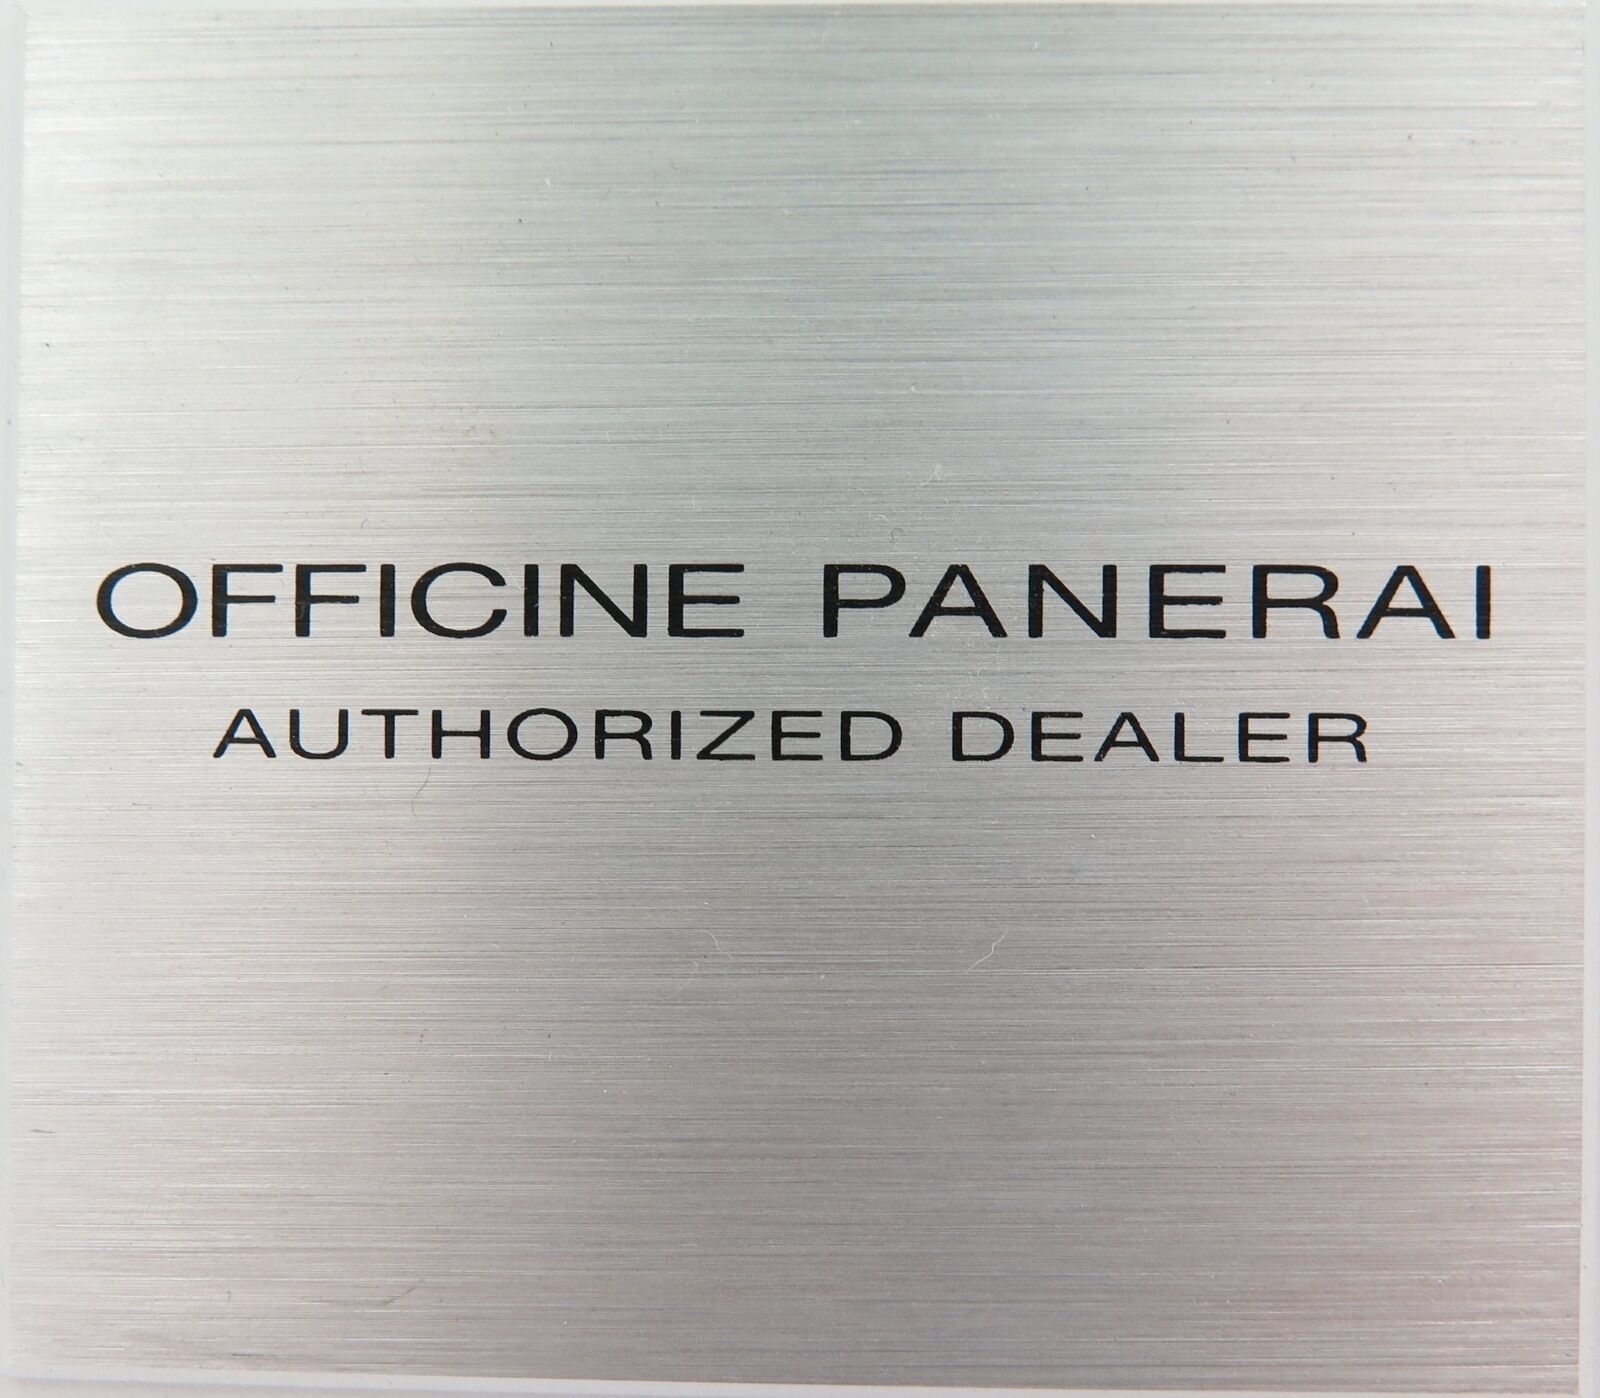 Scarce Officine Panerai Authorized Dealer New Old Stock Small Metal Plaque